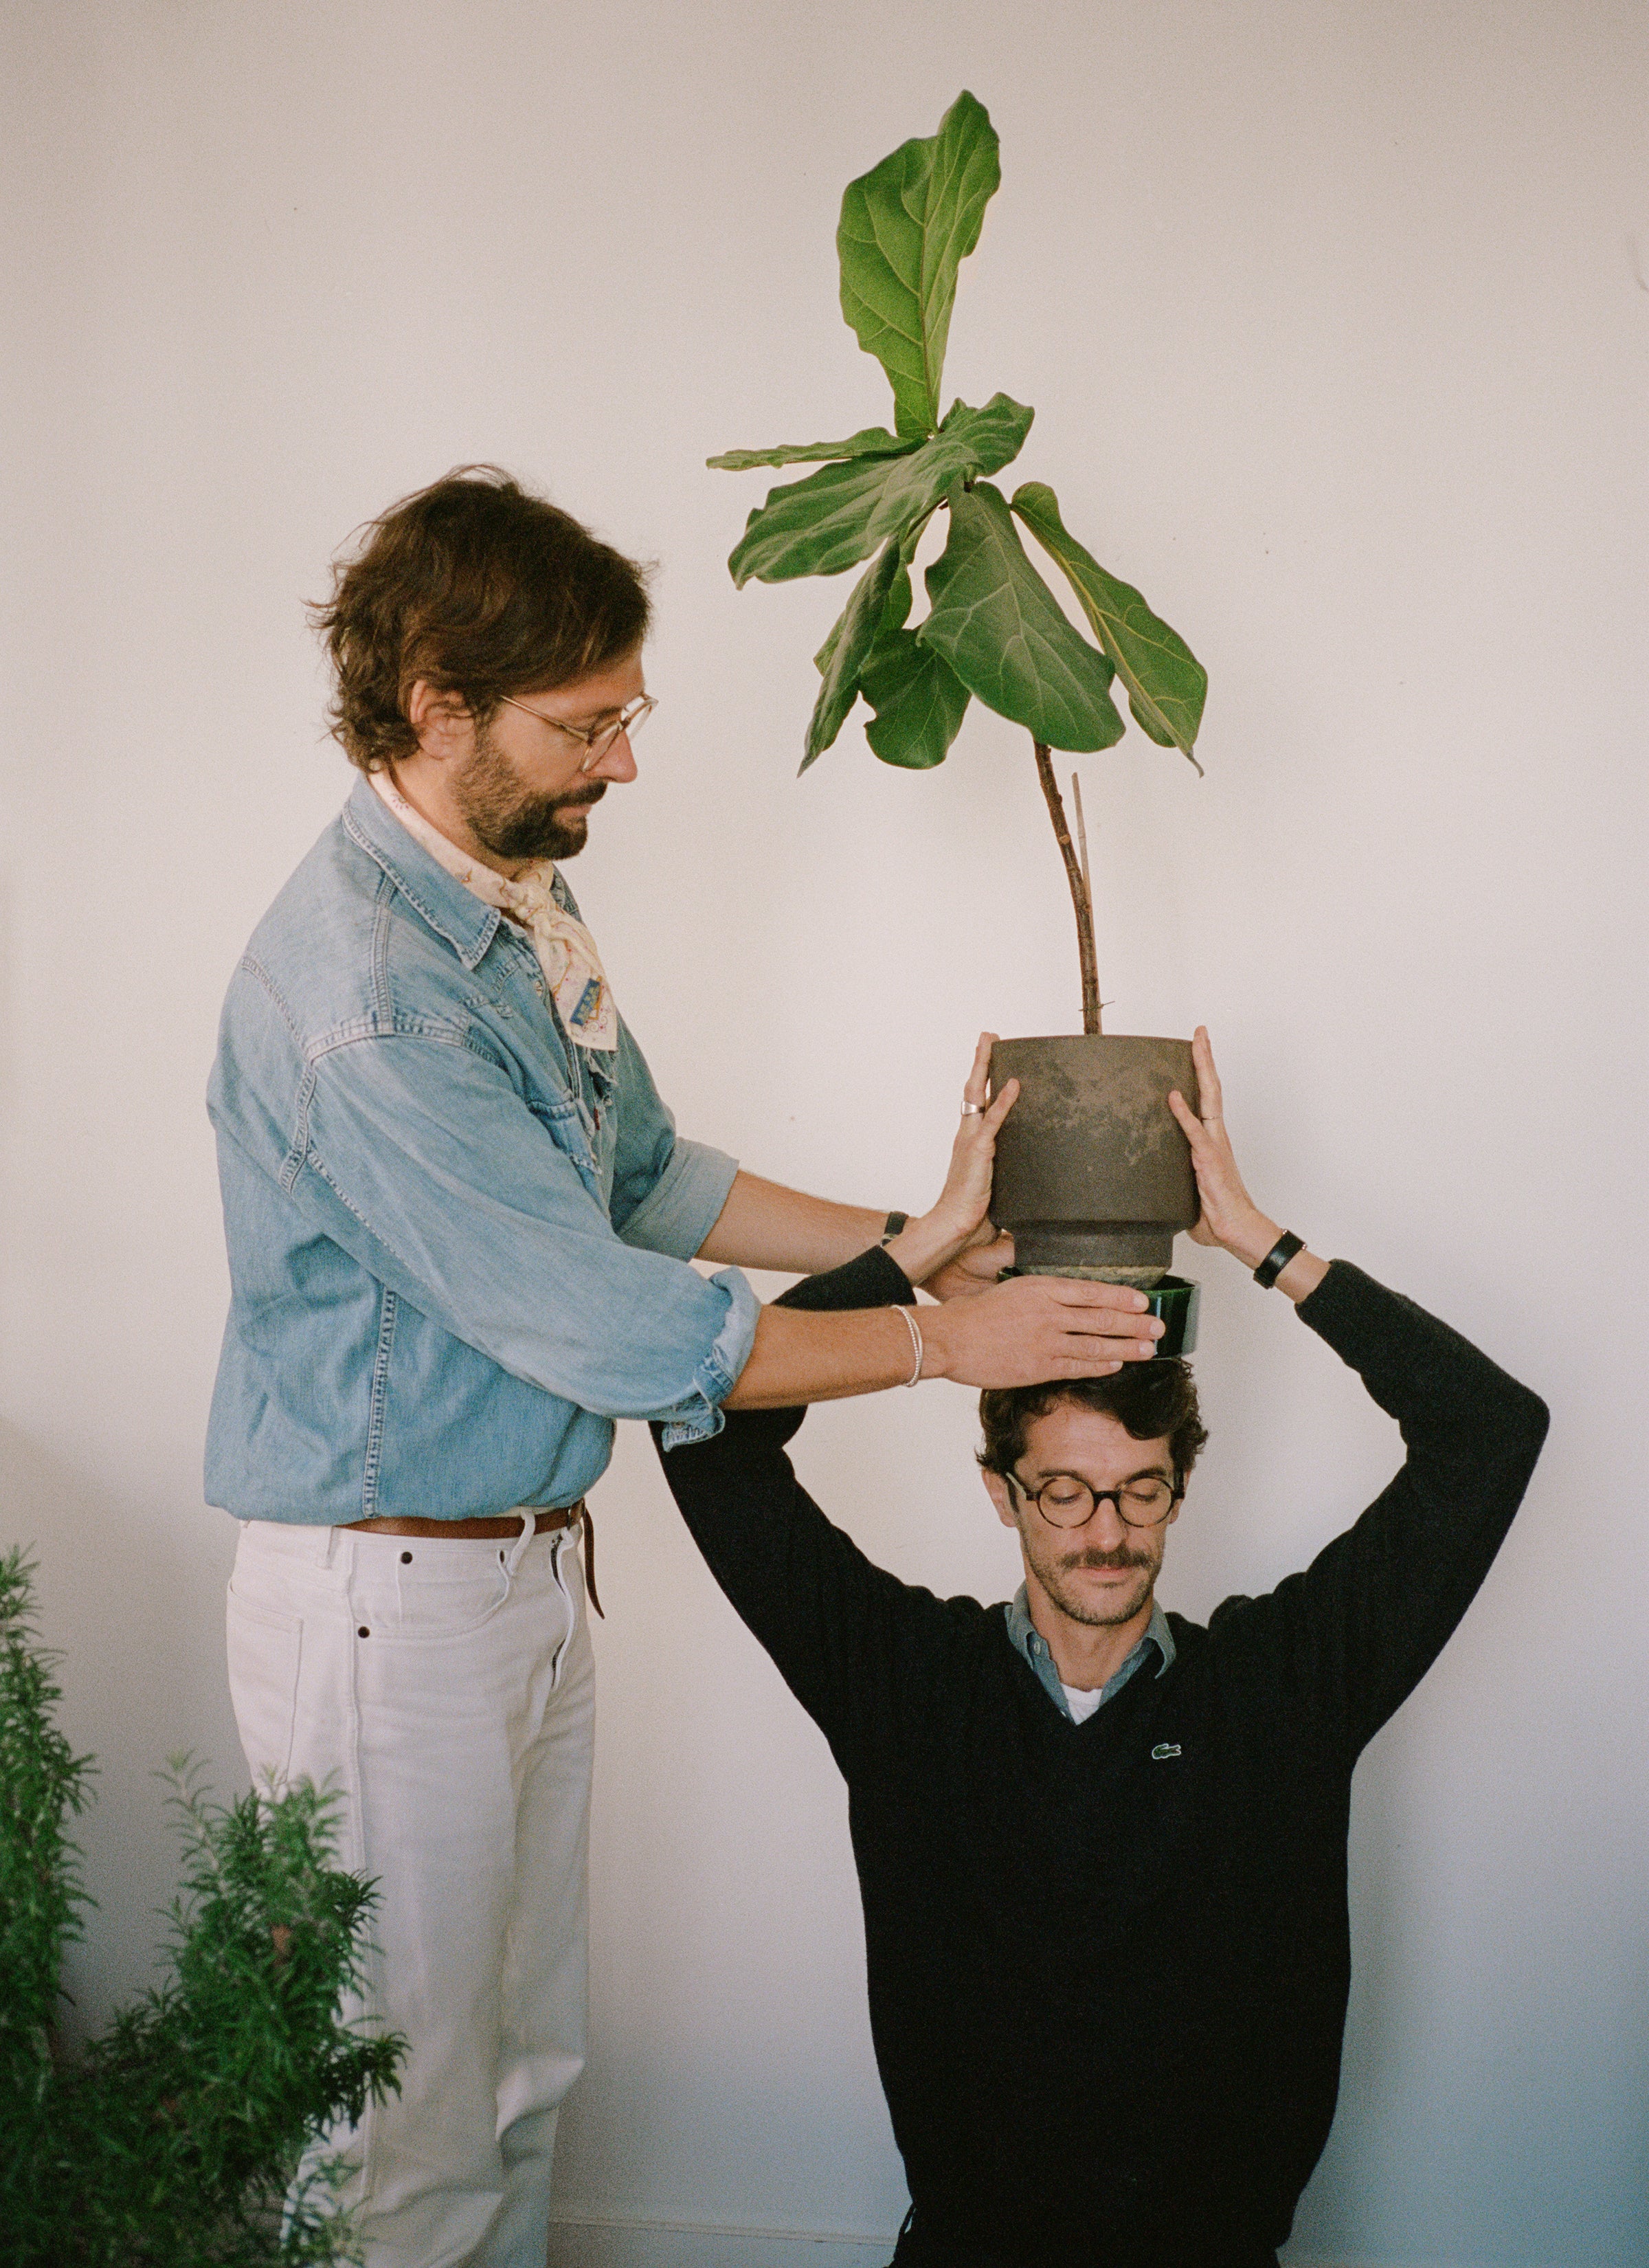 Mathias and Geoffery were in front of the white wall, while Geoffery squatted down holding a pot of Fiddle-leaf figs above his head and Mathias helped him balance it on the top.